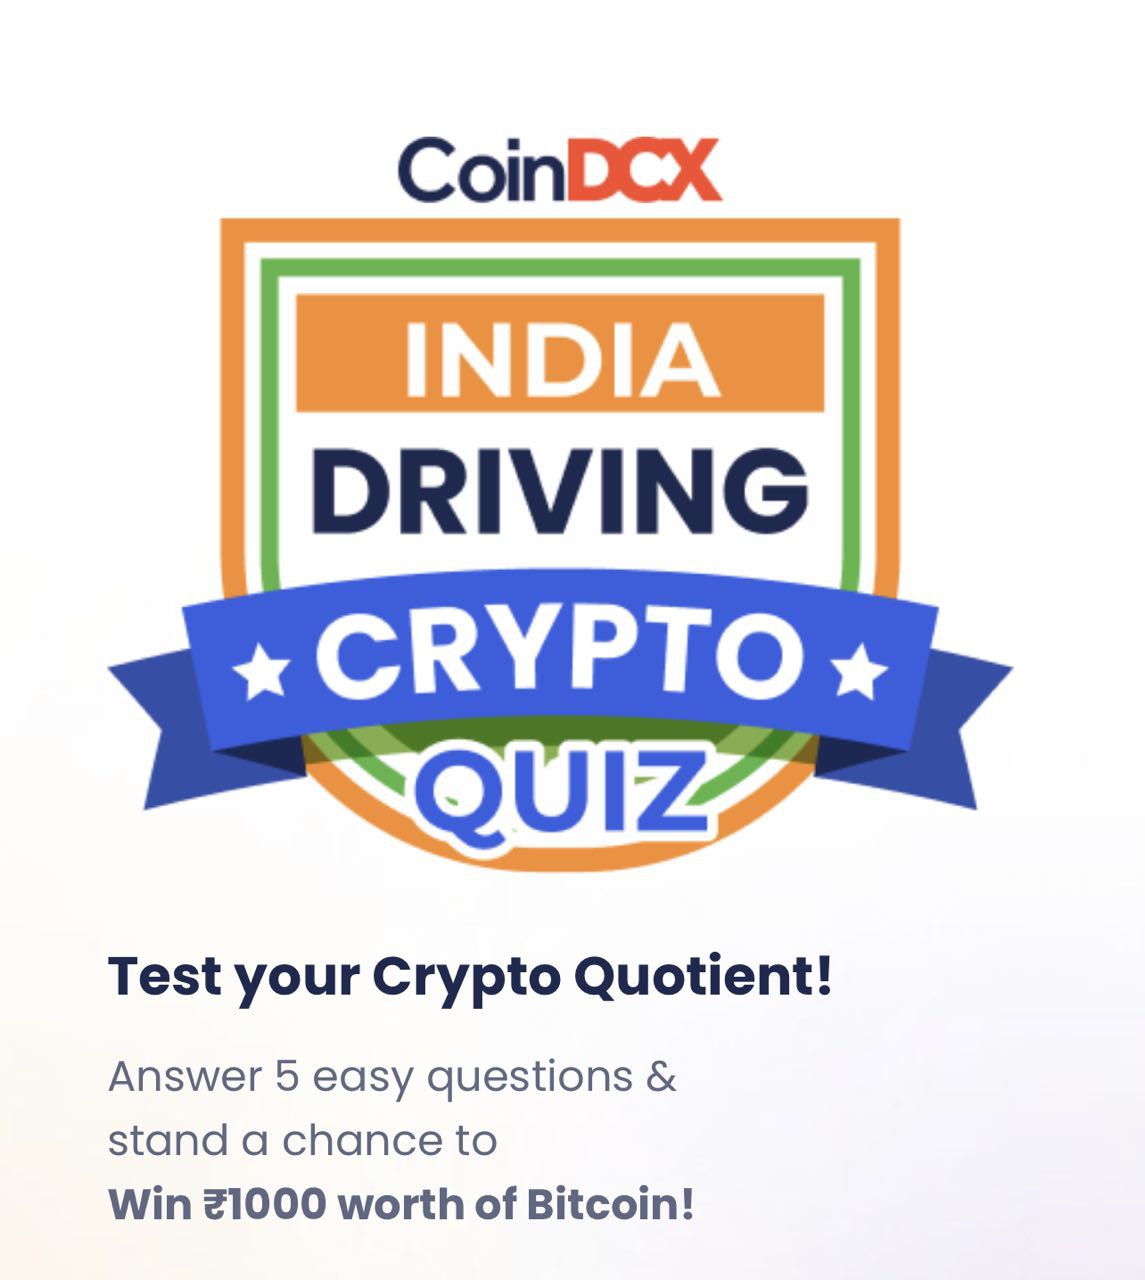 Coindcx India Driving Crypto Quiz answers